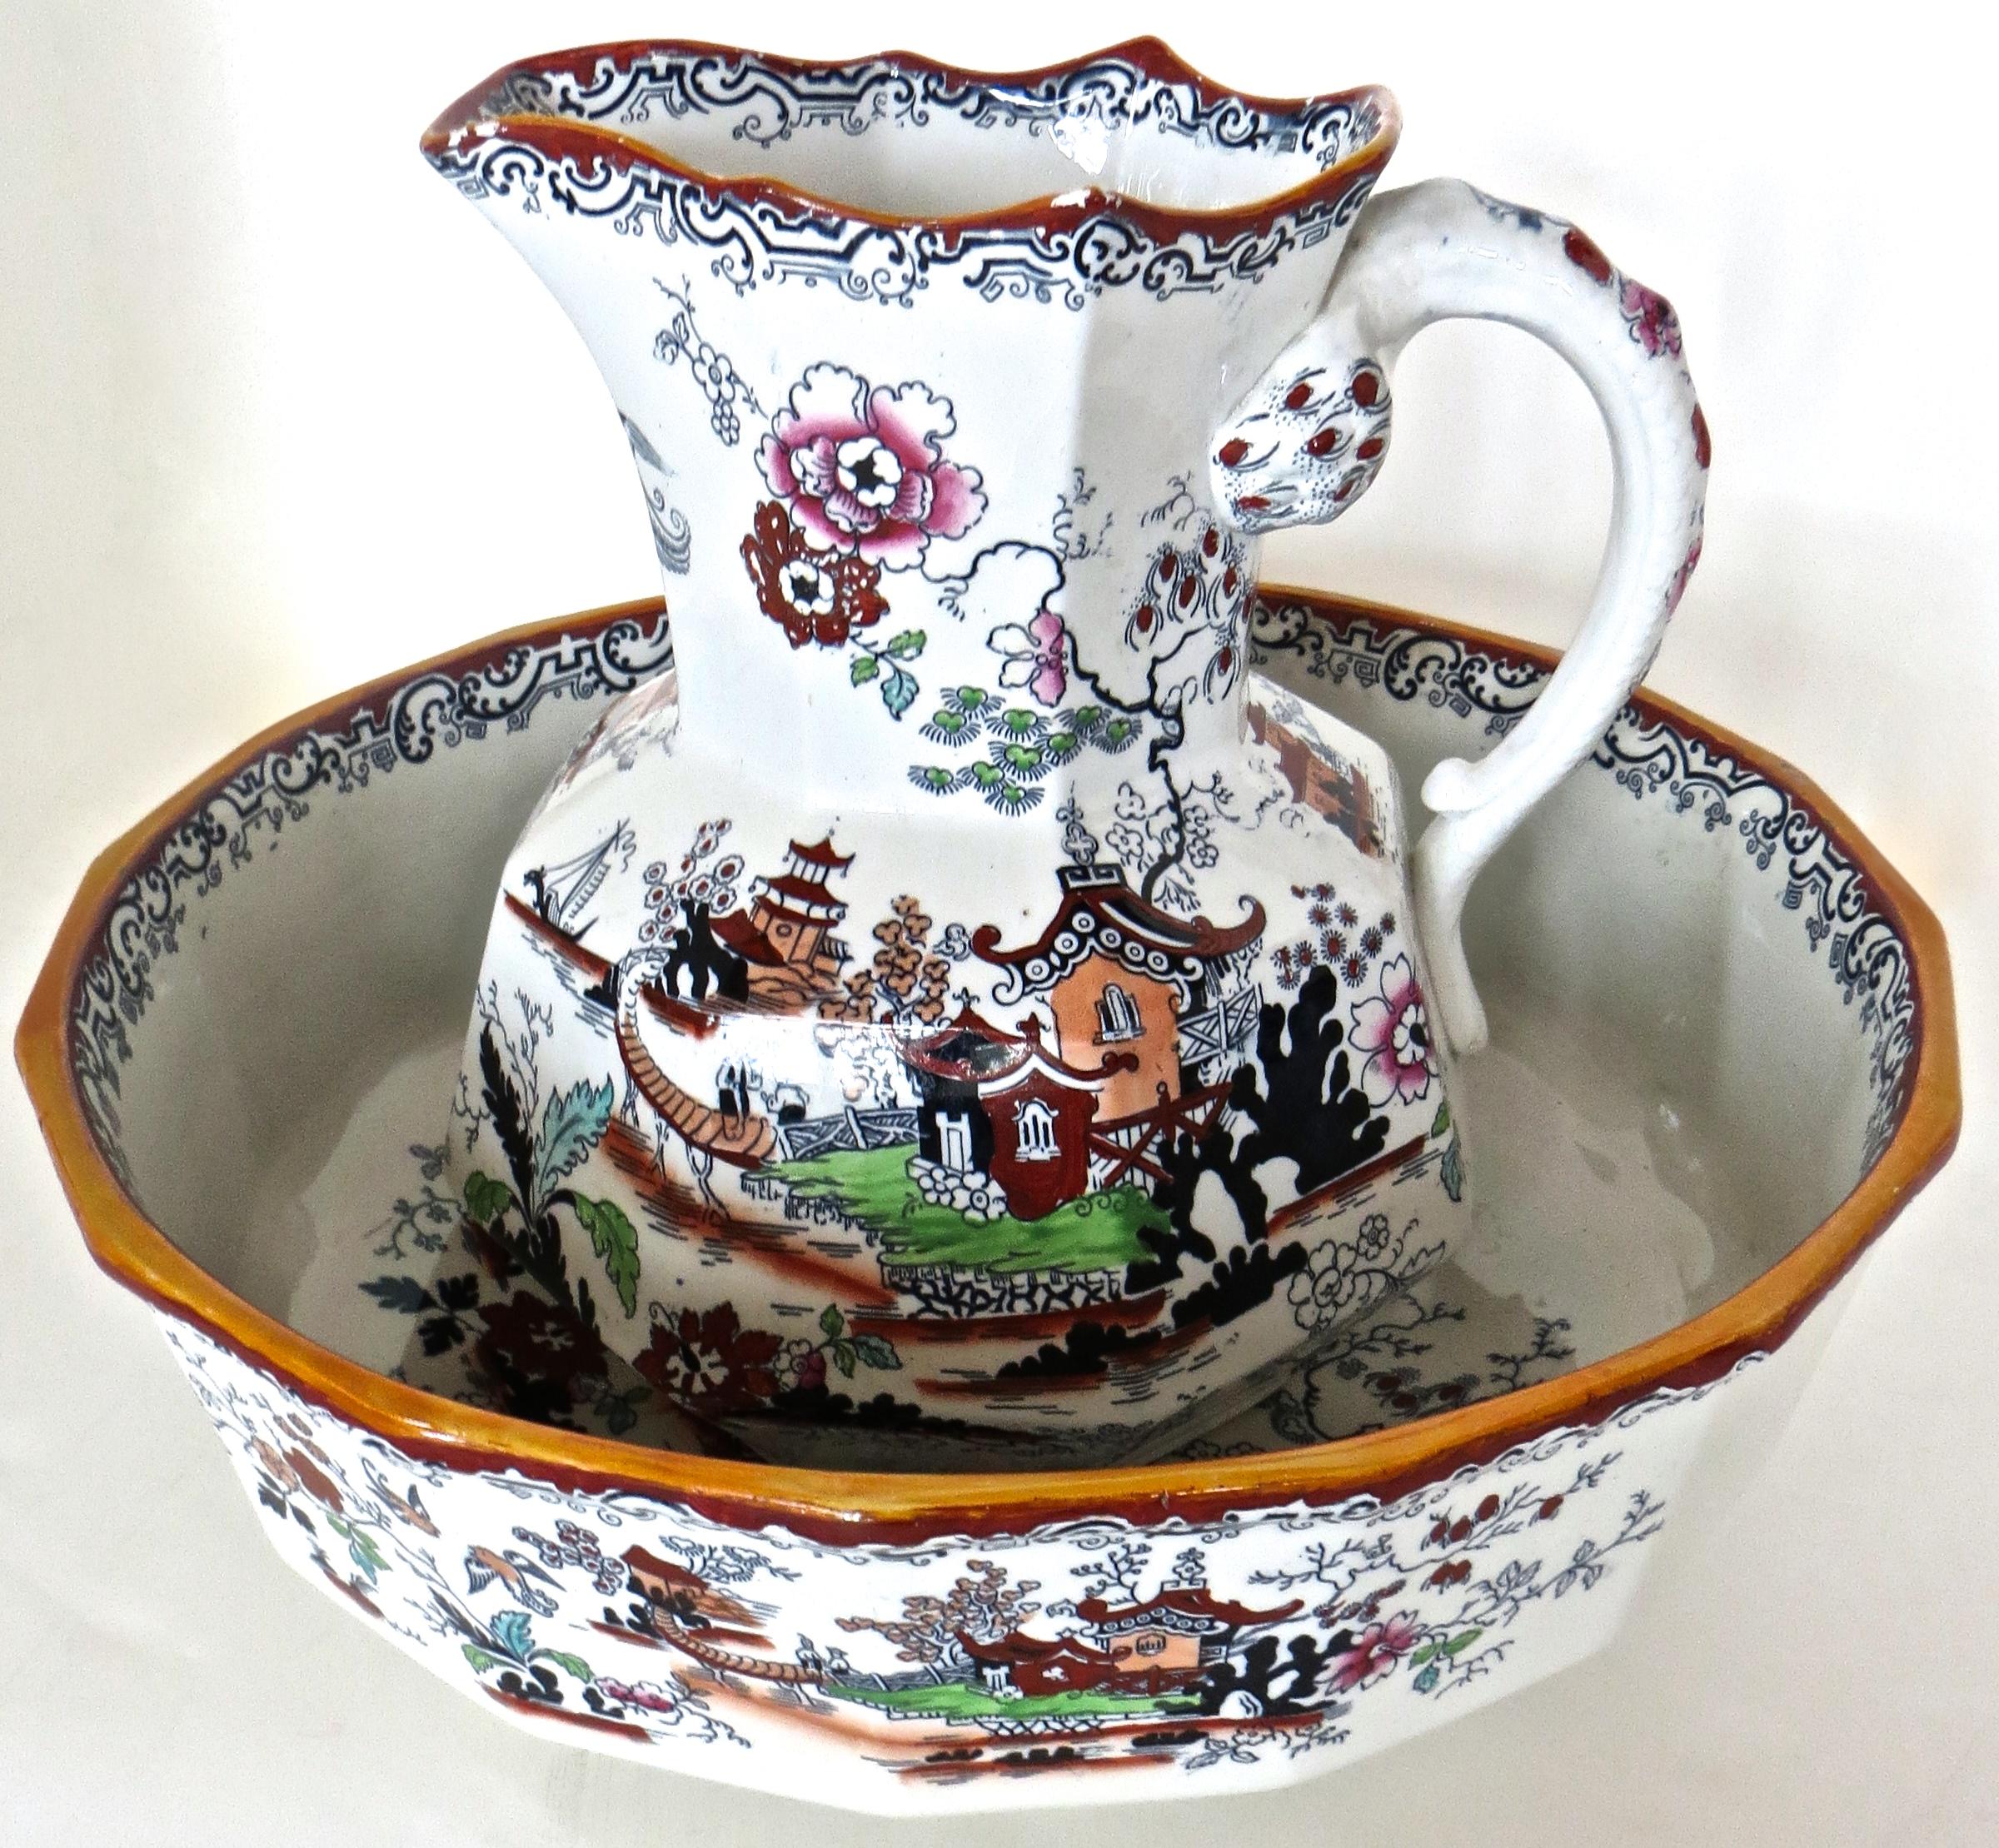 Outstanding and rare early 19th century Mason's Ironstone (6) piece set consisting of toilet necessities as follows:
Large oversized highly decorated pitcher and bowl for storing water and wash basin
Pair of chamber pots for evening needs
Similarly